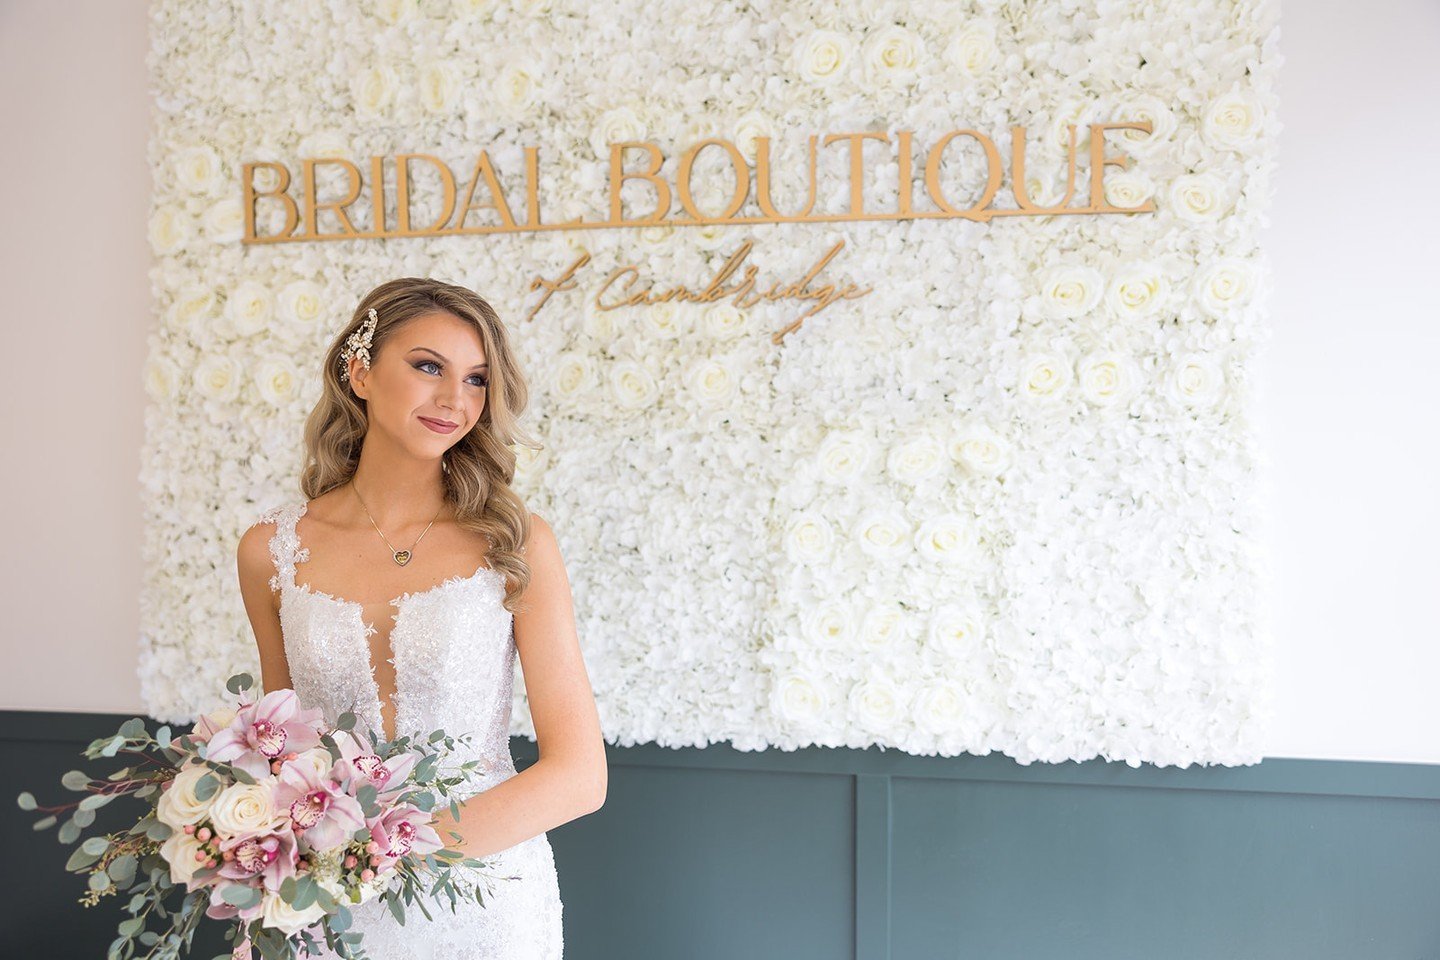 Don't miss out! Our friends at the Cambridge Bridal Boutique are hosting their Annual Sample Sale! The first 50 brides will receive an amazing gift bag, and DRESSES START AT ONLY $299!!!

#CambridgeBridalSampleSale #SayYesToTheDress #BridalBargains #